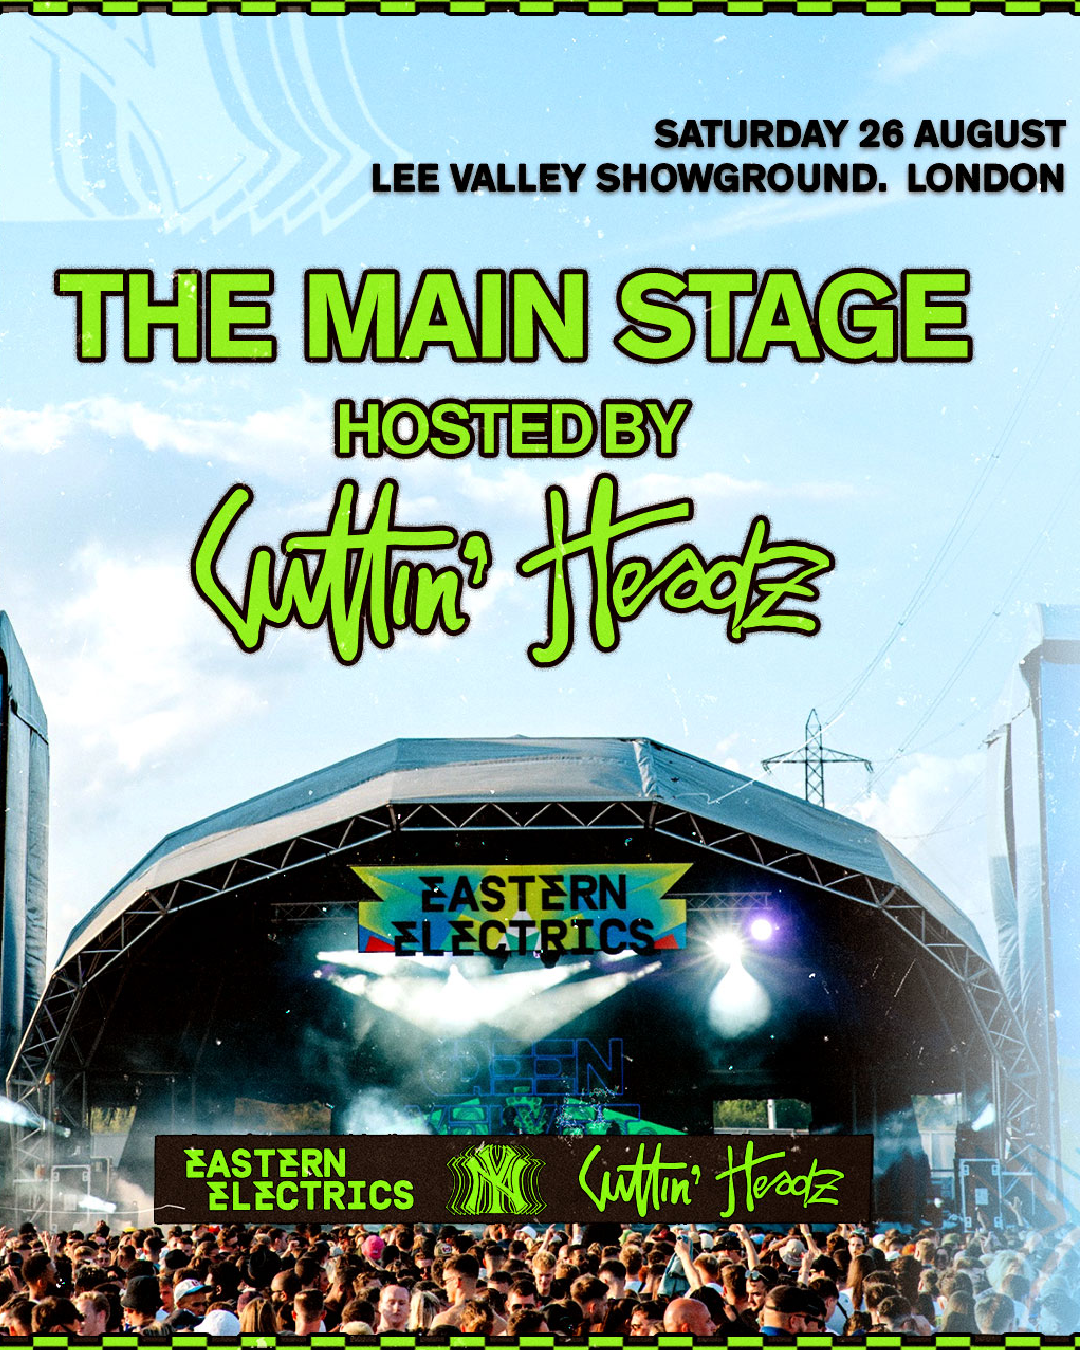 Get to know the Main Stage hosted by Cuttin' Headz